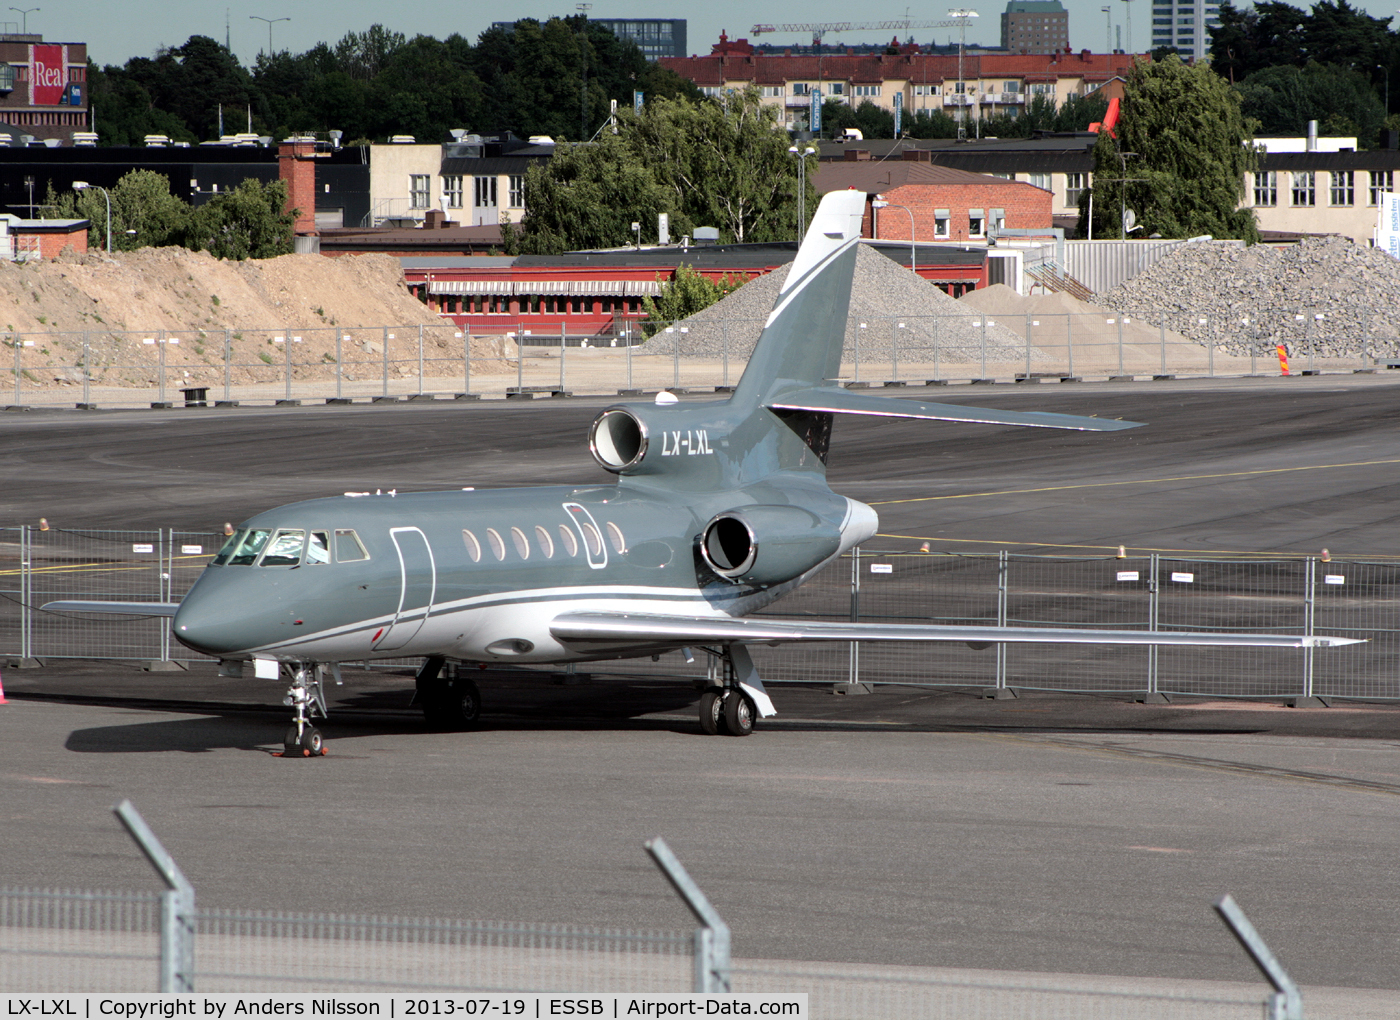 LX-LXL, 2001 Dassault Falcon 50EX C/N 315, Parked over night.